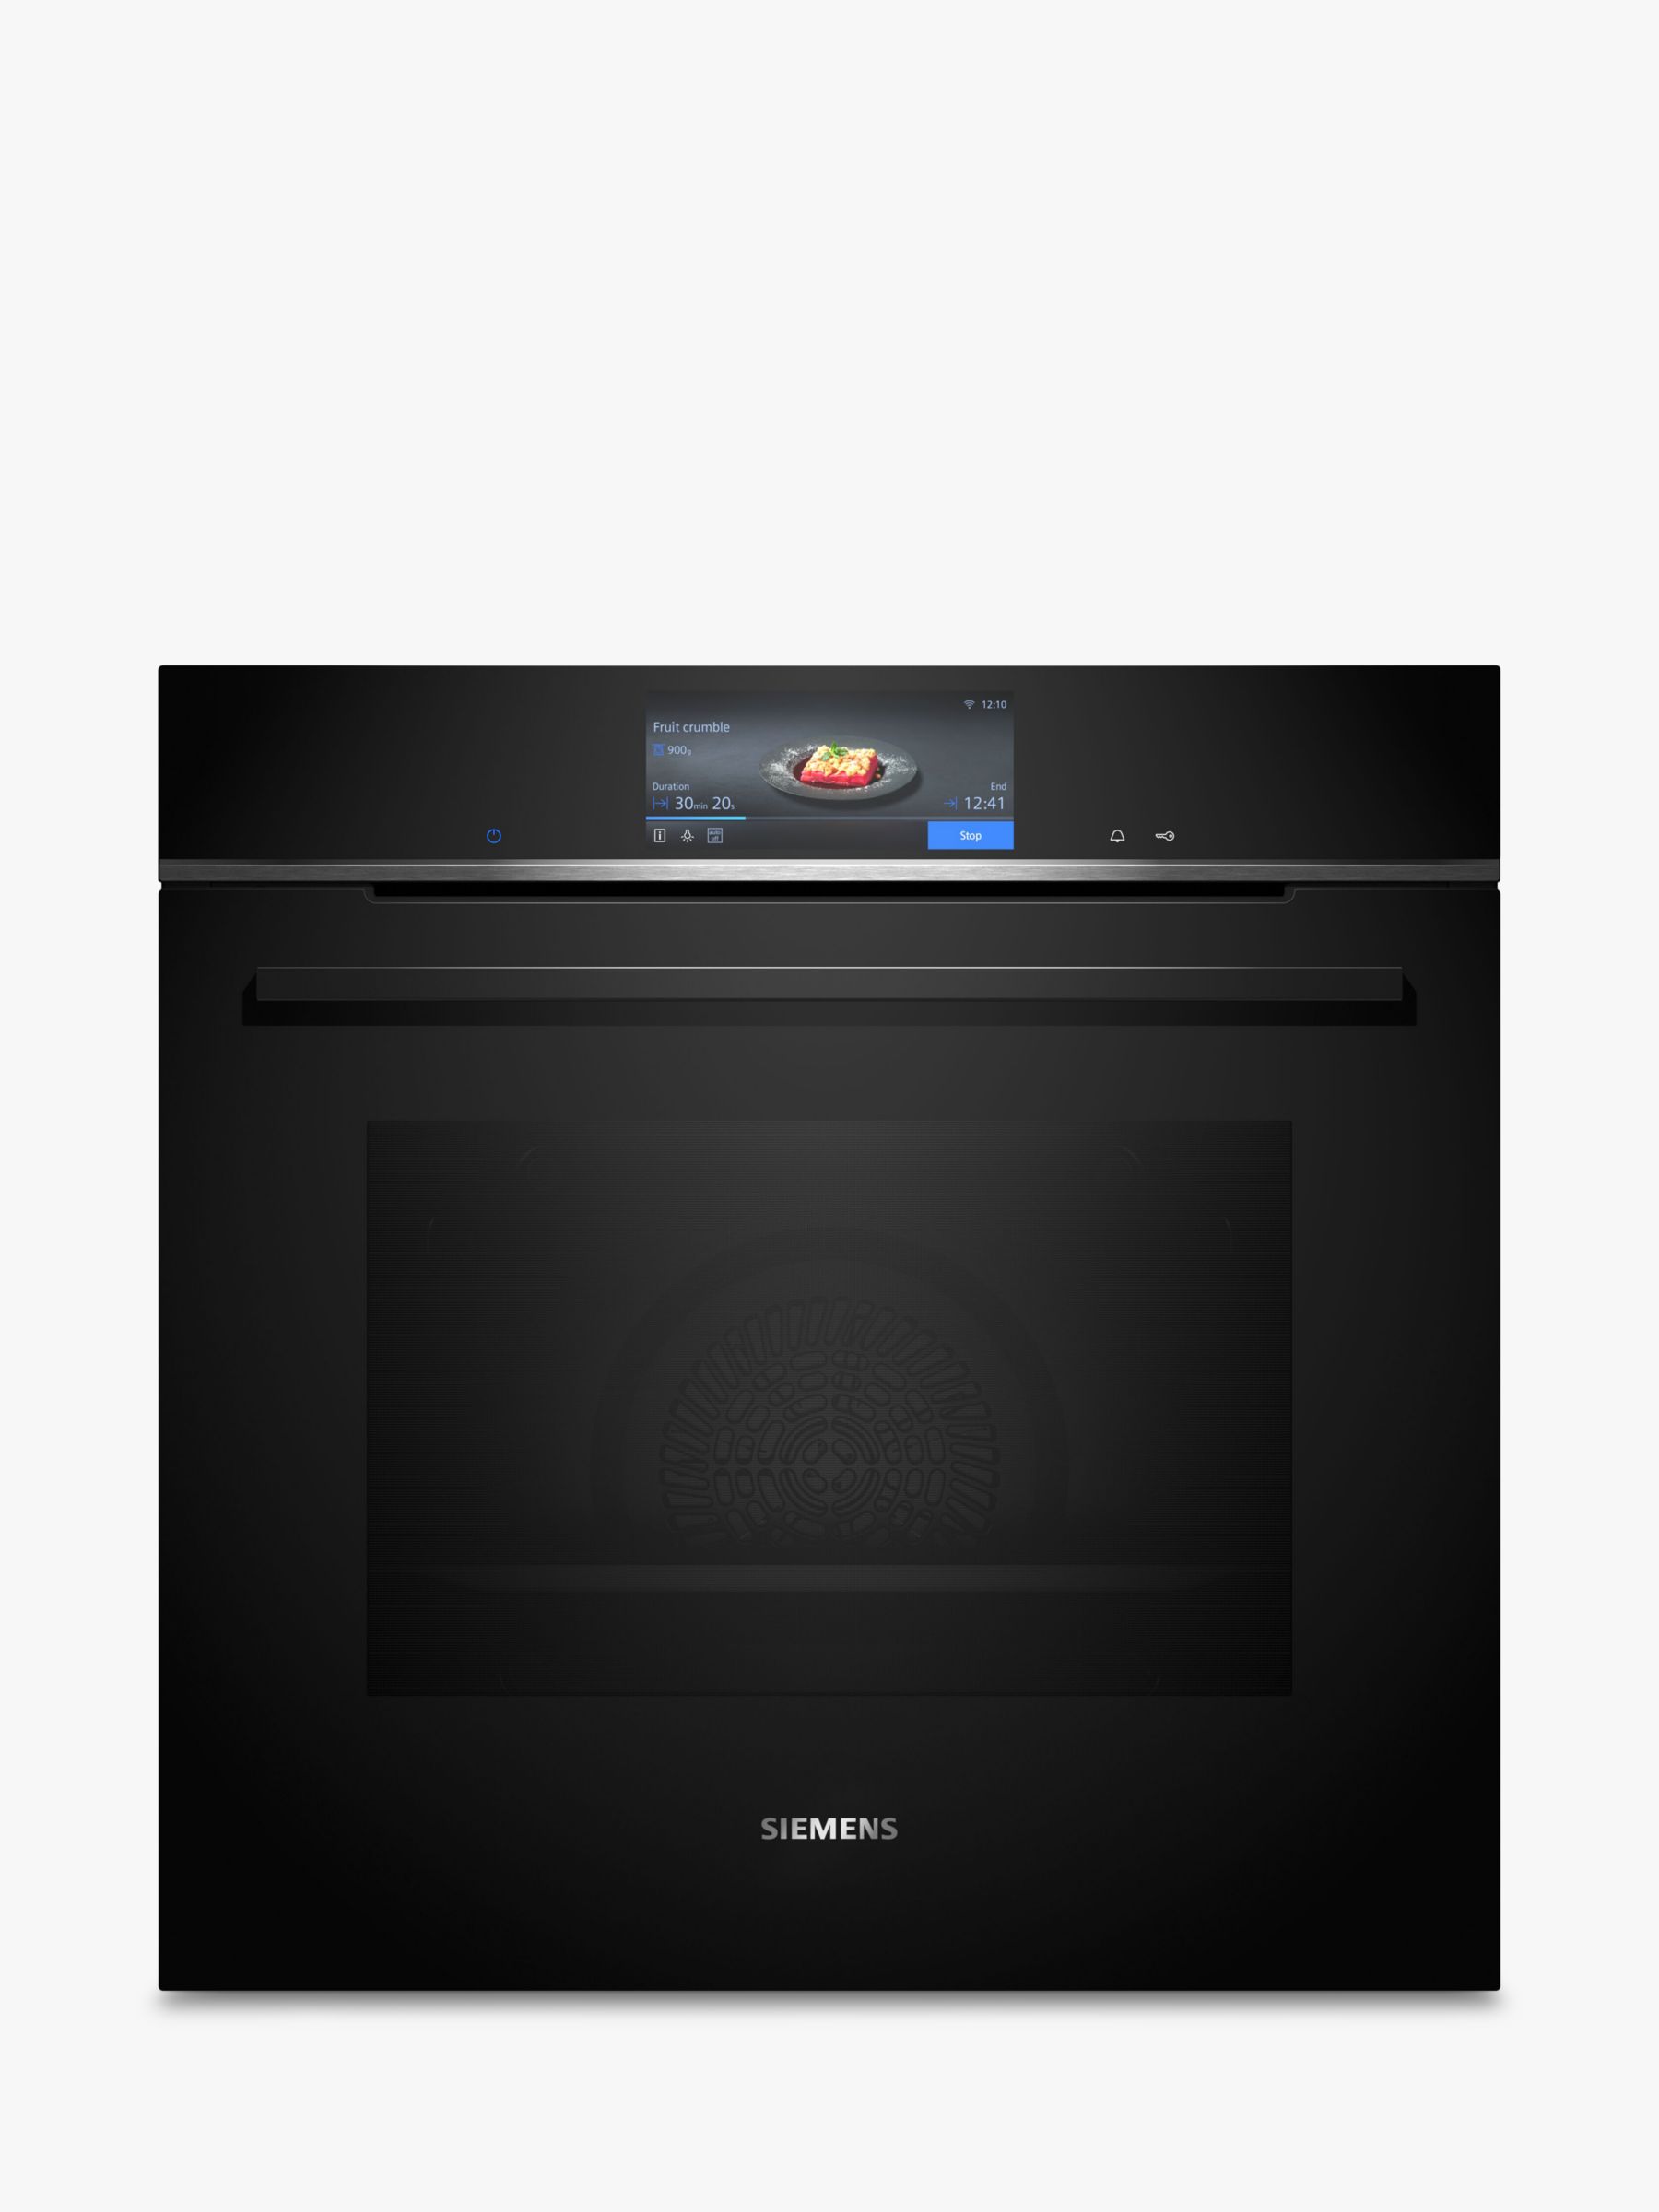 luge laser Nonsens Siemens iQ7Pro HB778G3B1B Pyrolitic Self Cleaning Built-In Electric Oven,  Black